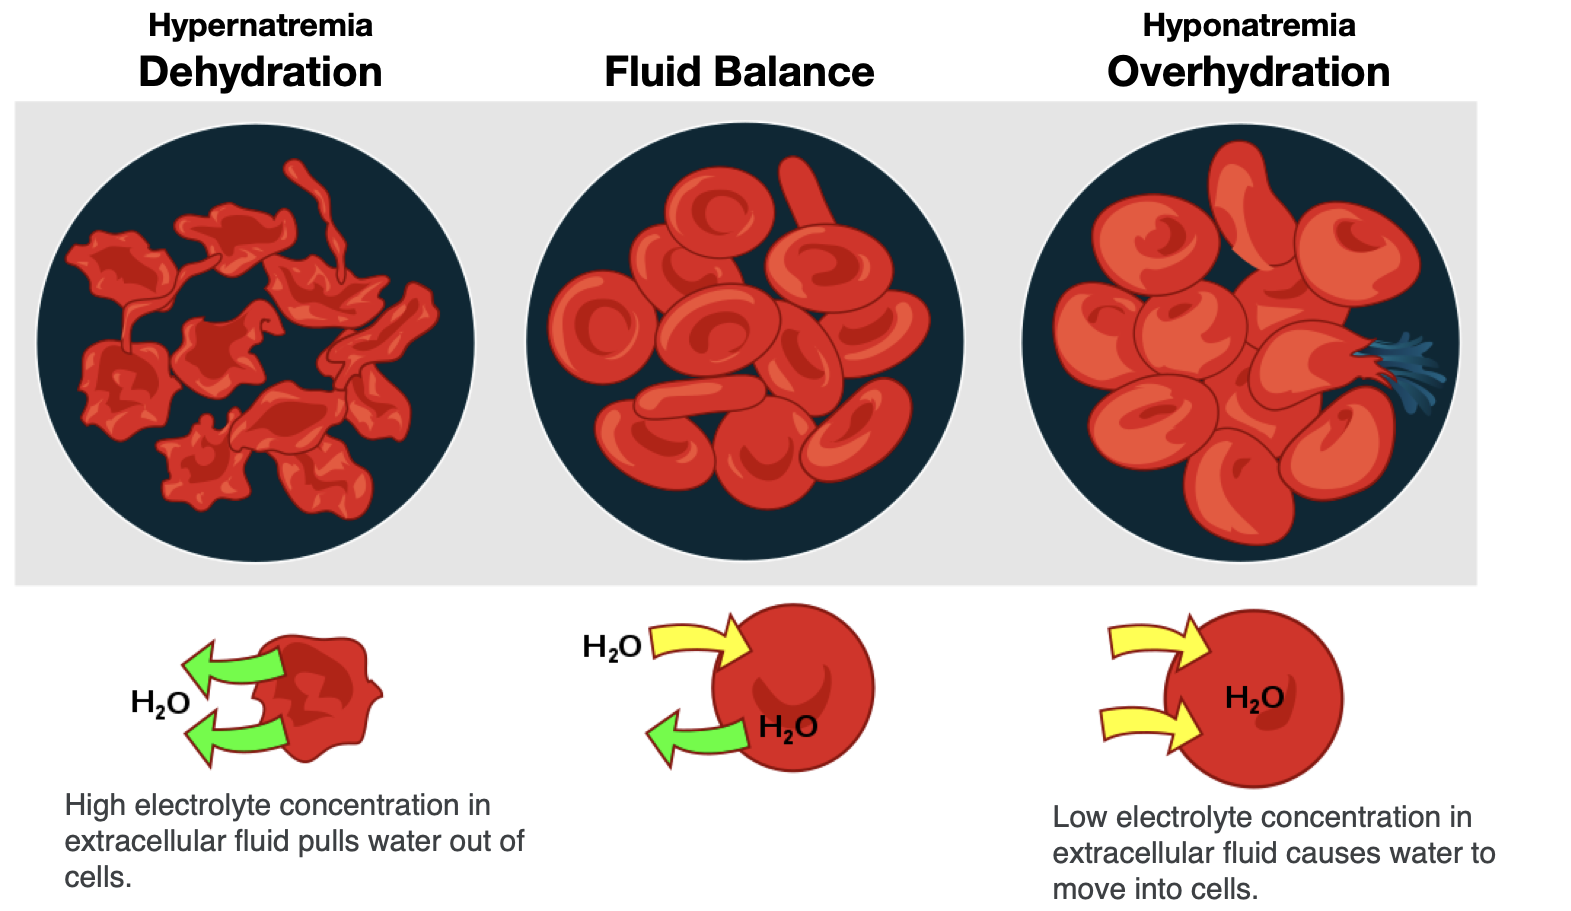 Three different hydration states are shown with the cell. With dehydration, the concentration of electrolytes becomes greater outside of cells, leading to water leaving cells and making them shrink. In fluid balance, electrolyte concentrations are equal inside and outside the cells, so water is in balance, too. During overhydration, electrolyte concentrations are low outside the cell relative to inside the cell (like in the situation of hyponatremia), so water moves into the cells, making them swell.